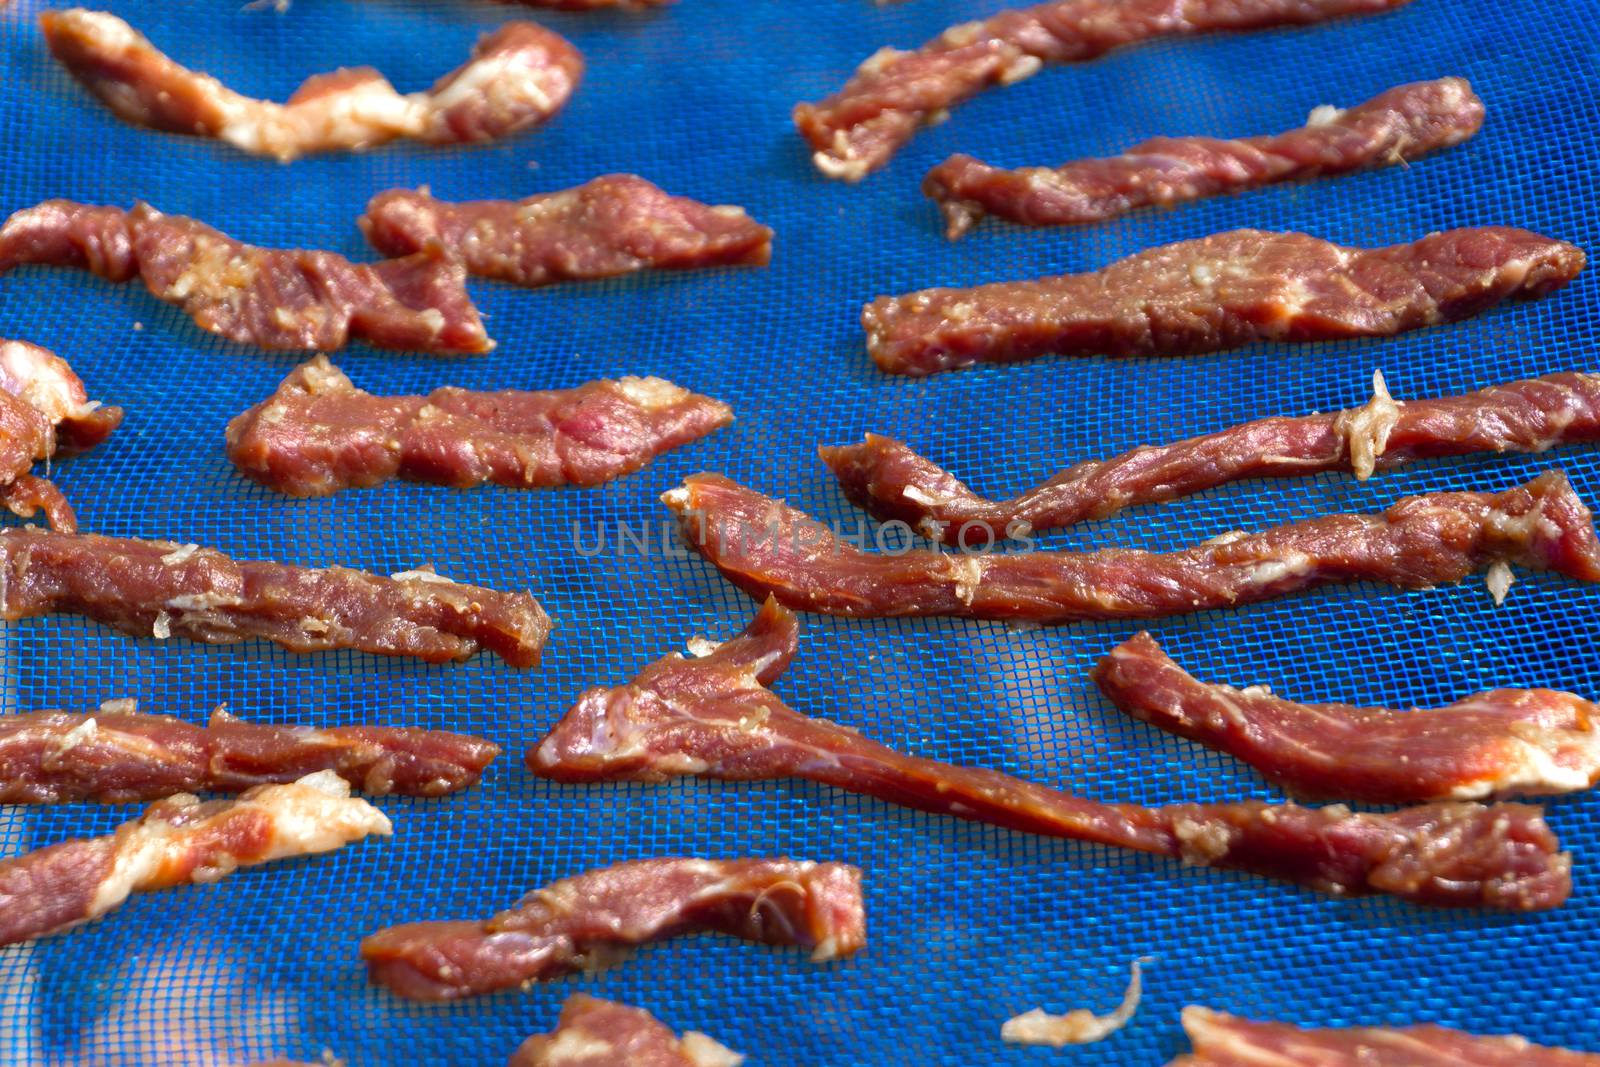 Dried meat is a feature of many cuisines around the world.